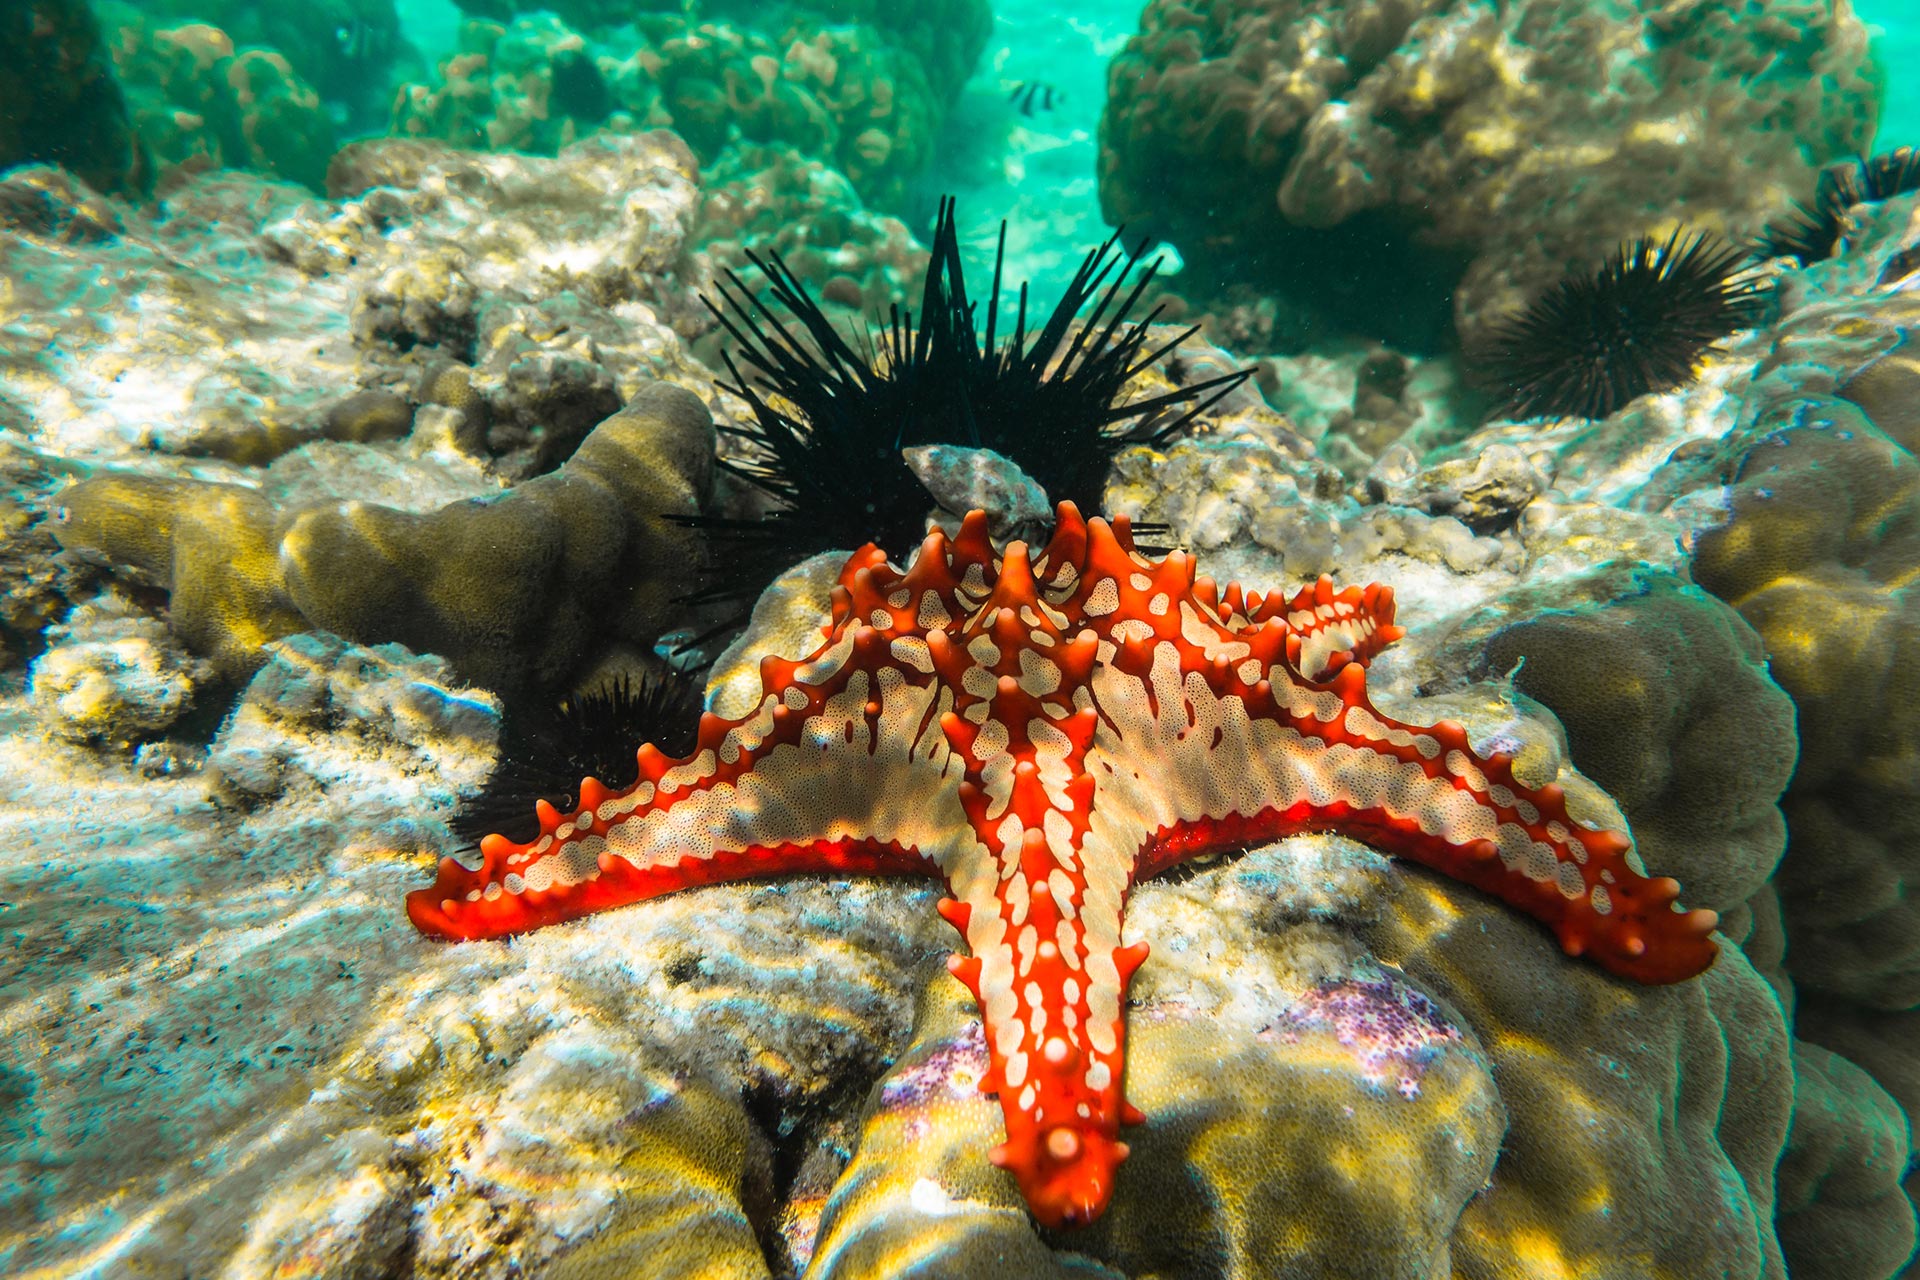 Red knobbed sea star and sea urchins